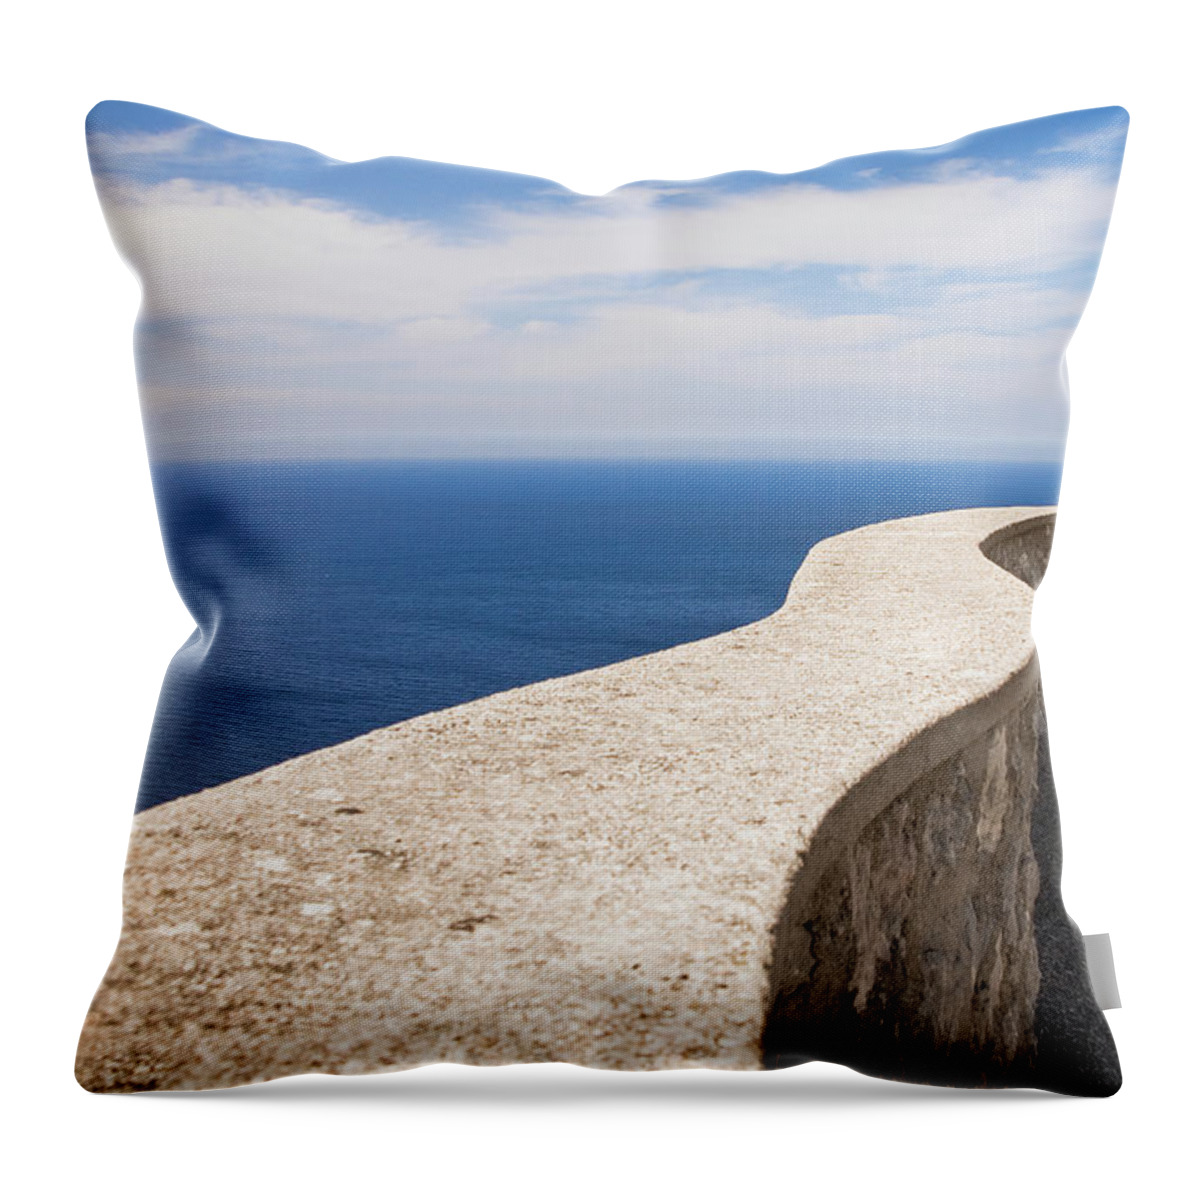 Curve Throw Pillow featuring the photograph Stone Curved Balustrade By The Sea by Light Thru My Lens Photography